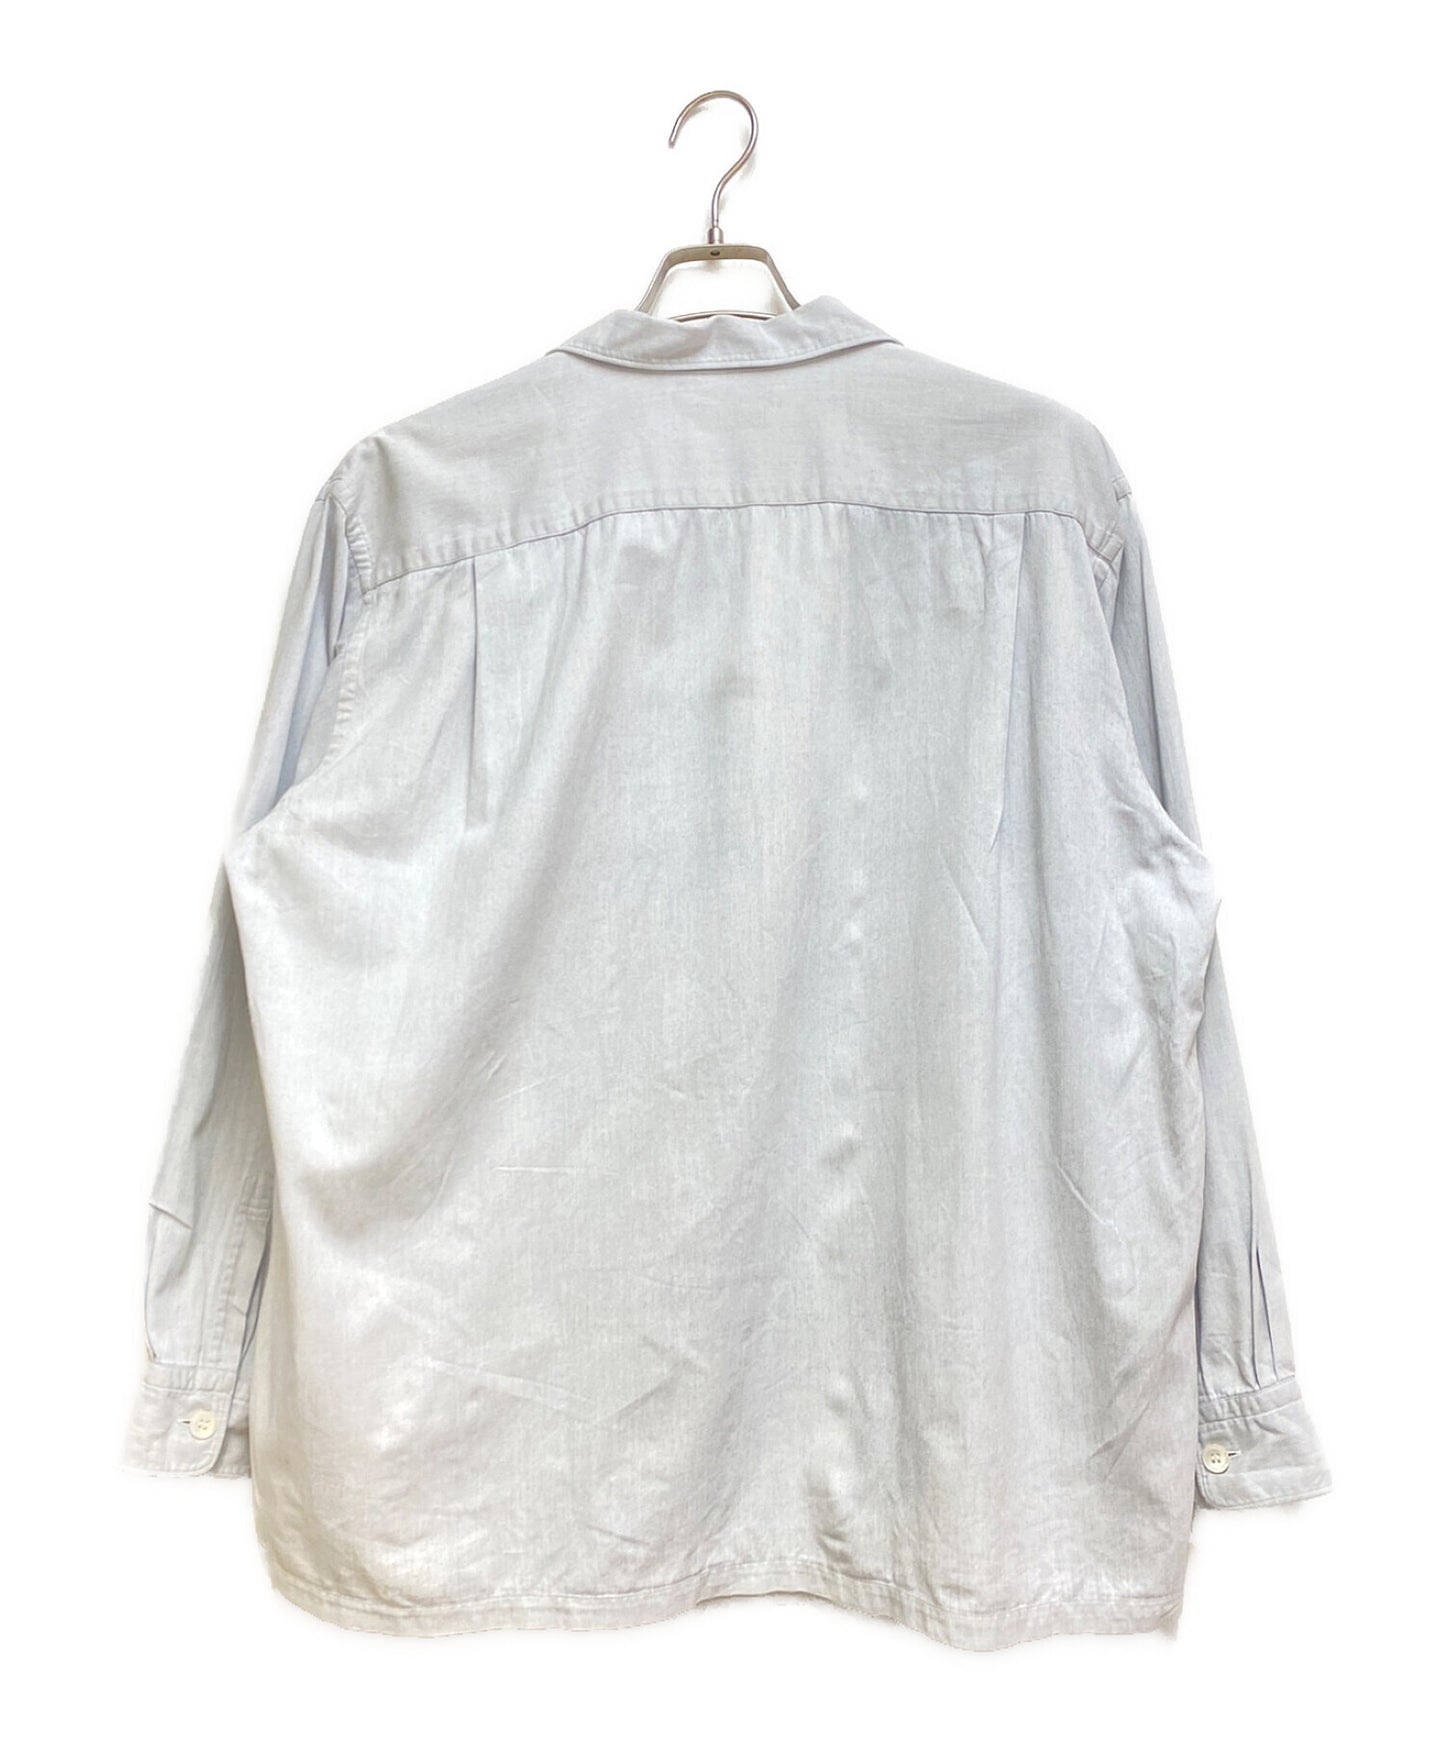 [Pre-owned] COMME des GARCONS HOMME Oversize open collar shirt / AD1998 / Tanaka period / Archive AD1998.